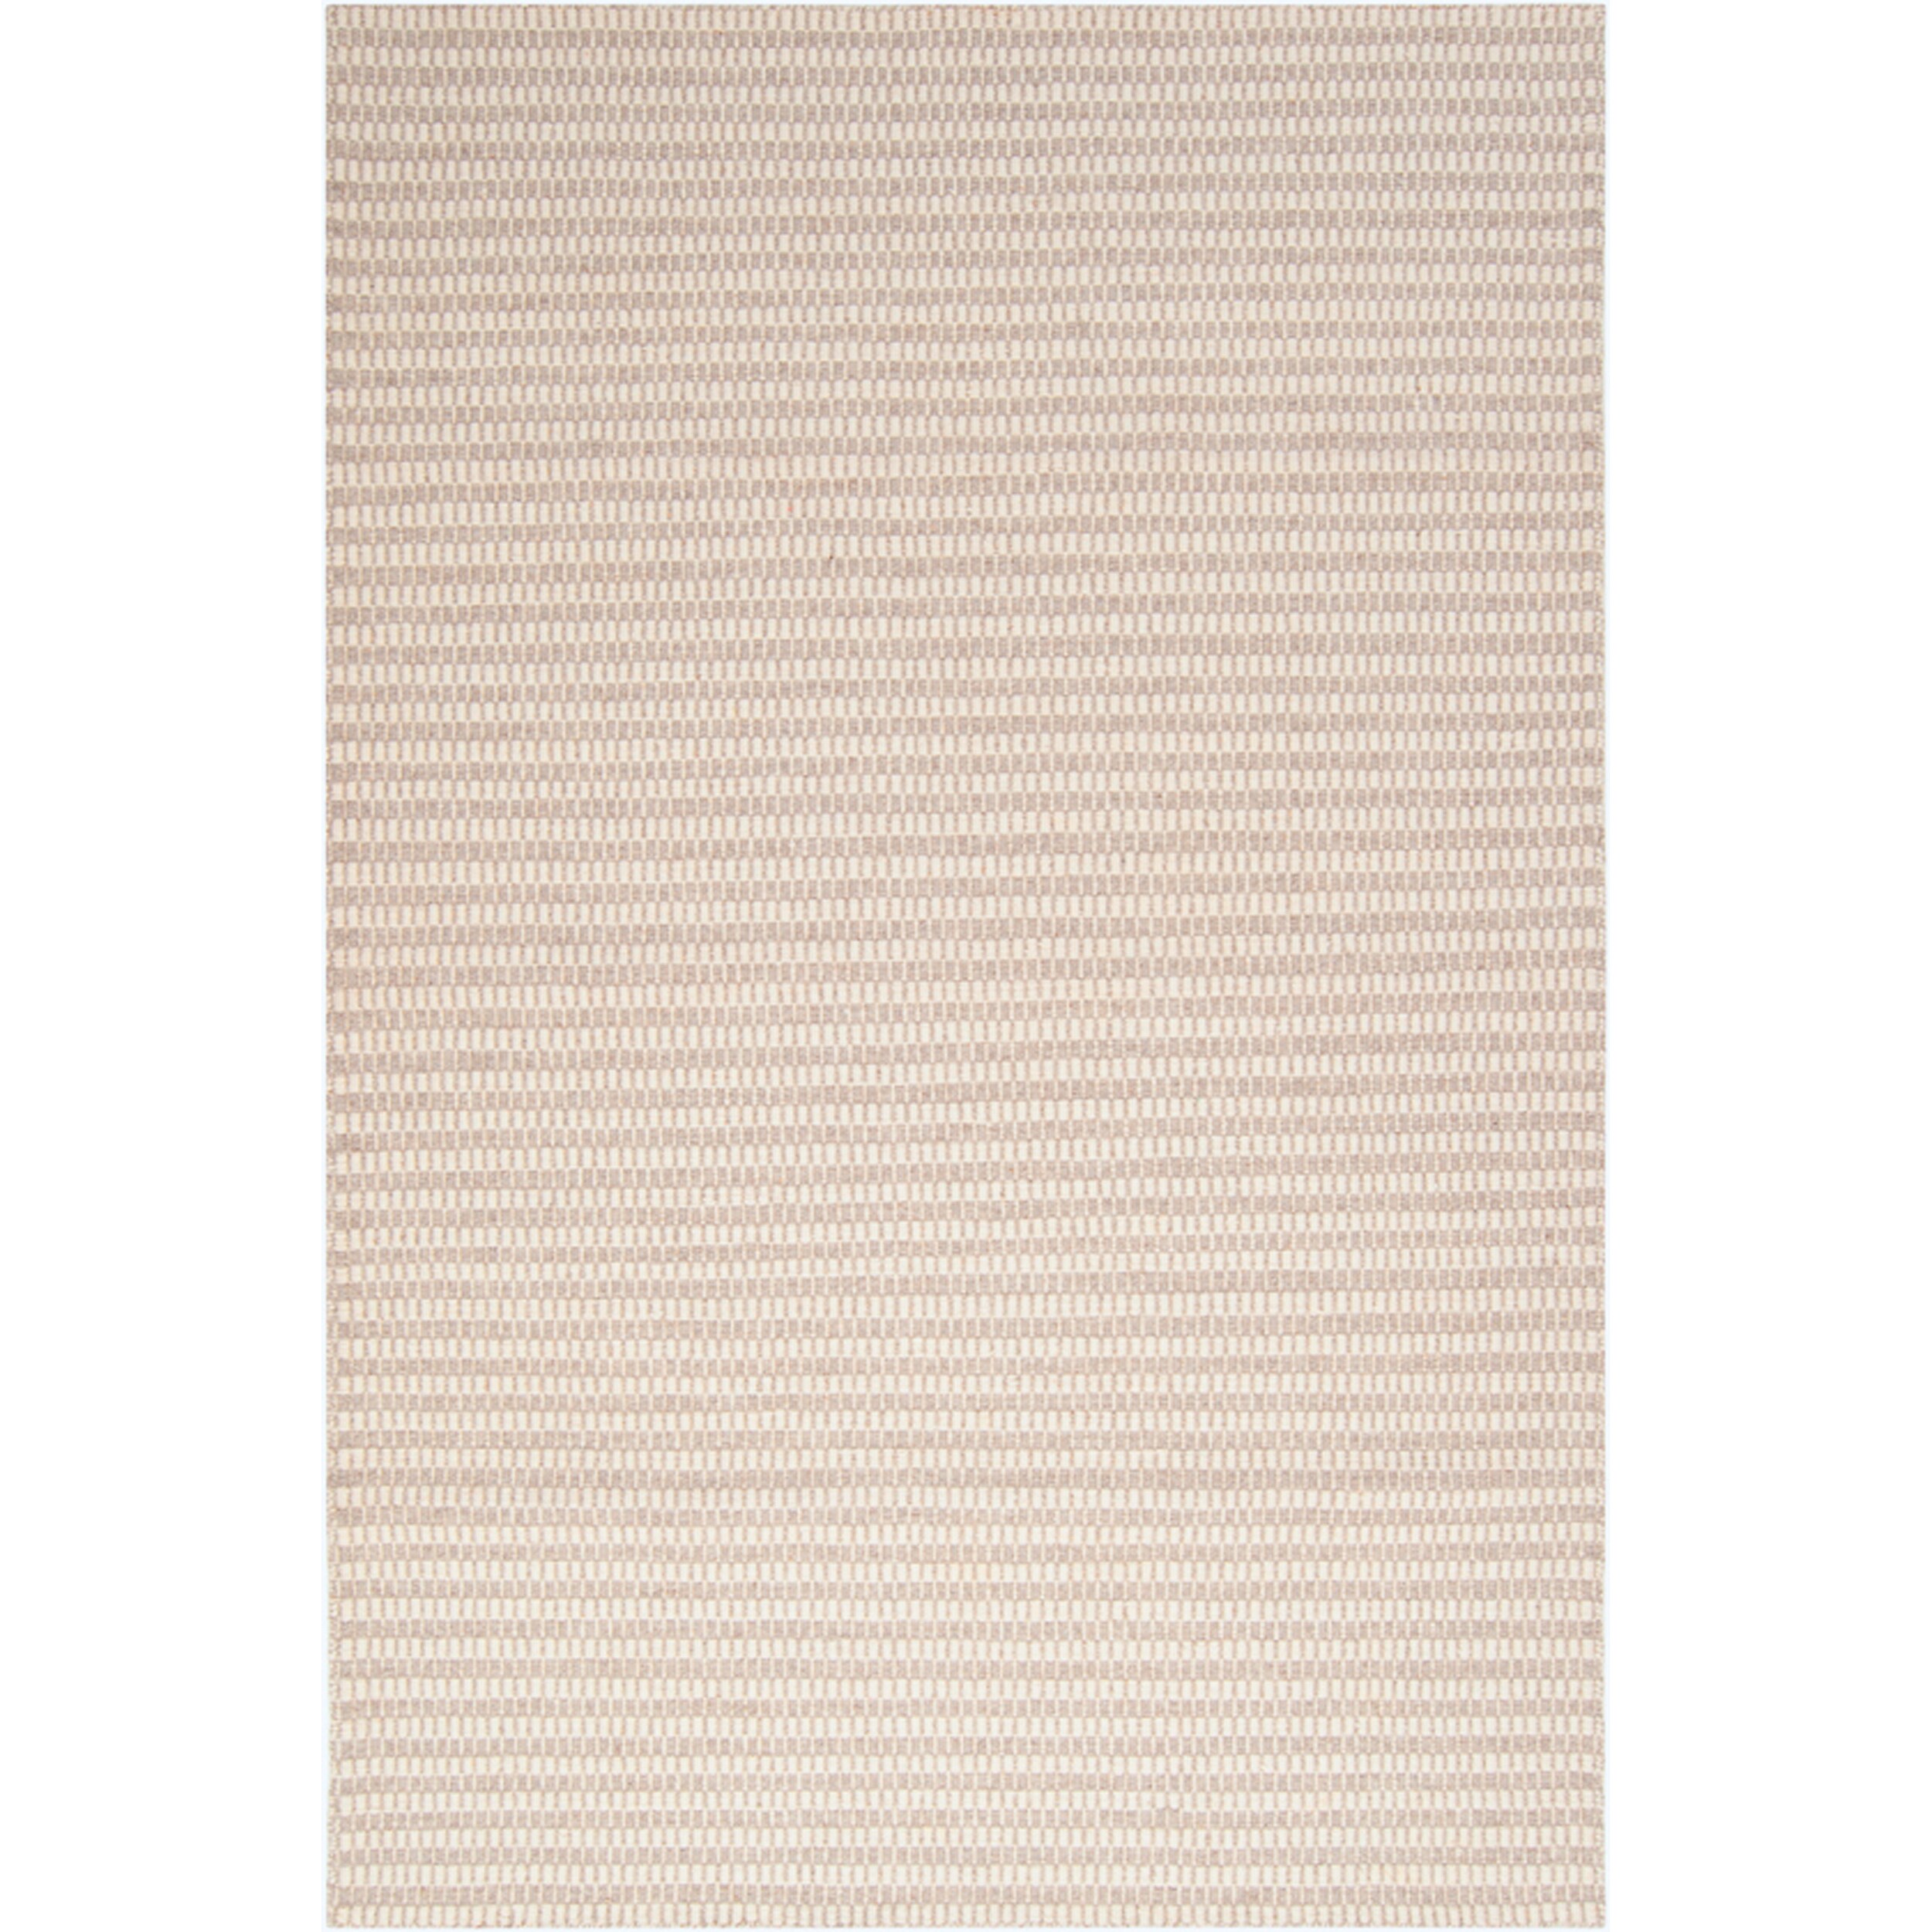 Handwoven Natural Emilia Biscotti Wool Rug (5 x 8) Today $250.99